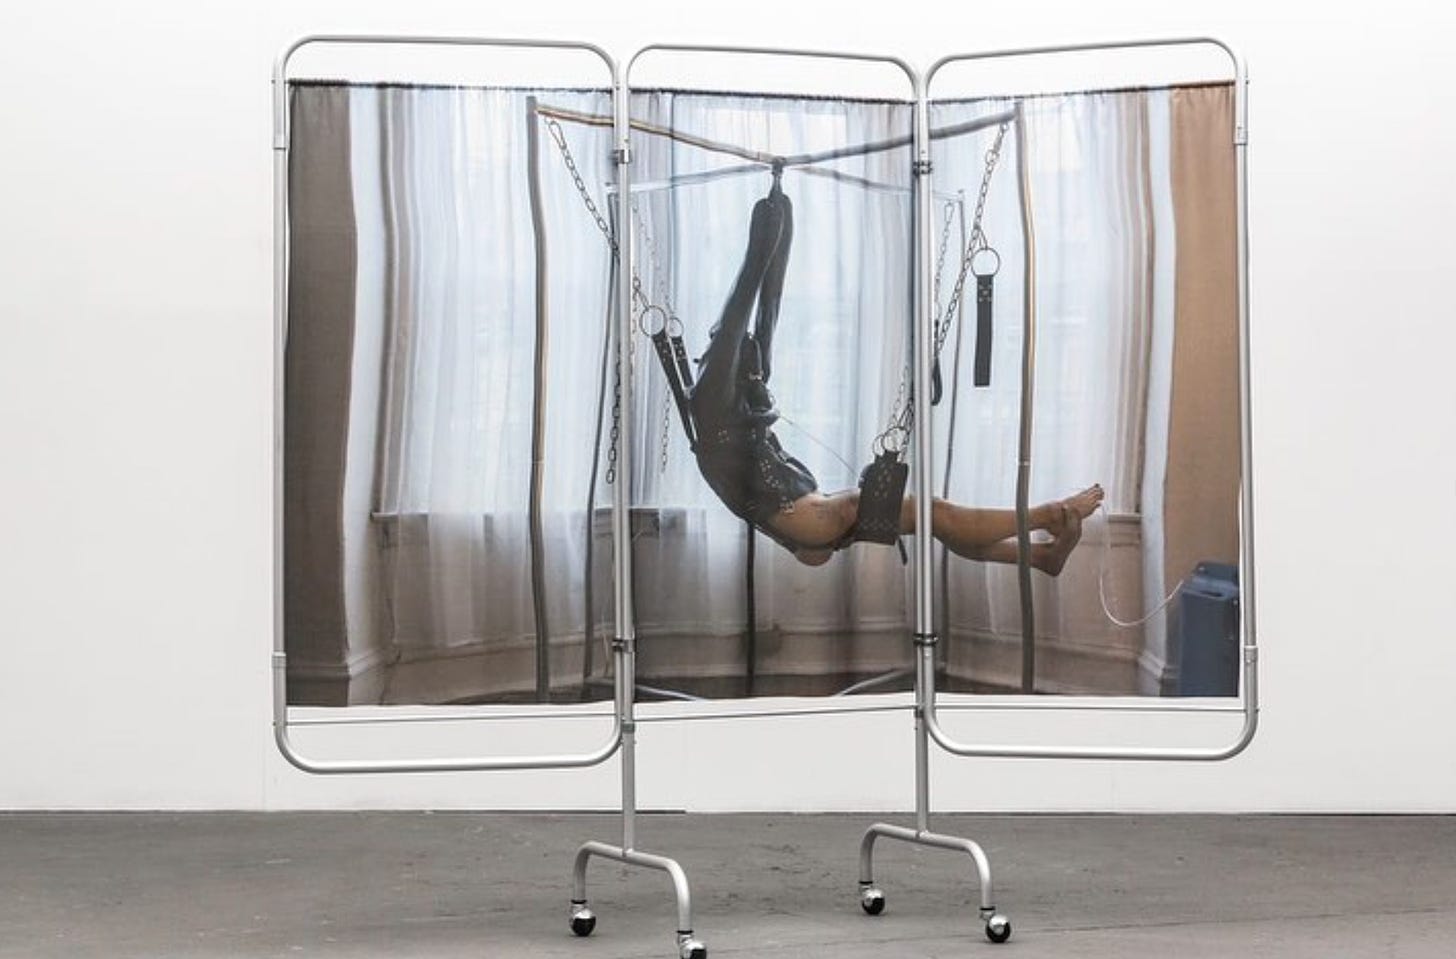 A photograph is printed on a wheeled 3-panel privacy screen that you might encounter in a clinical setting. In the image, a person is suspended in a leather sling with their hands tied over their head.